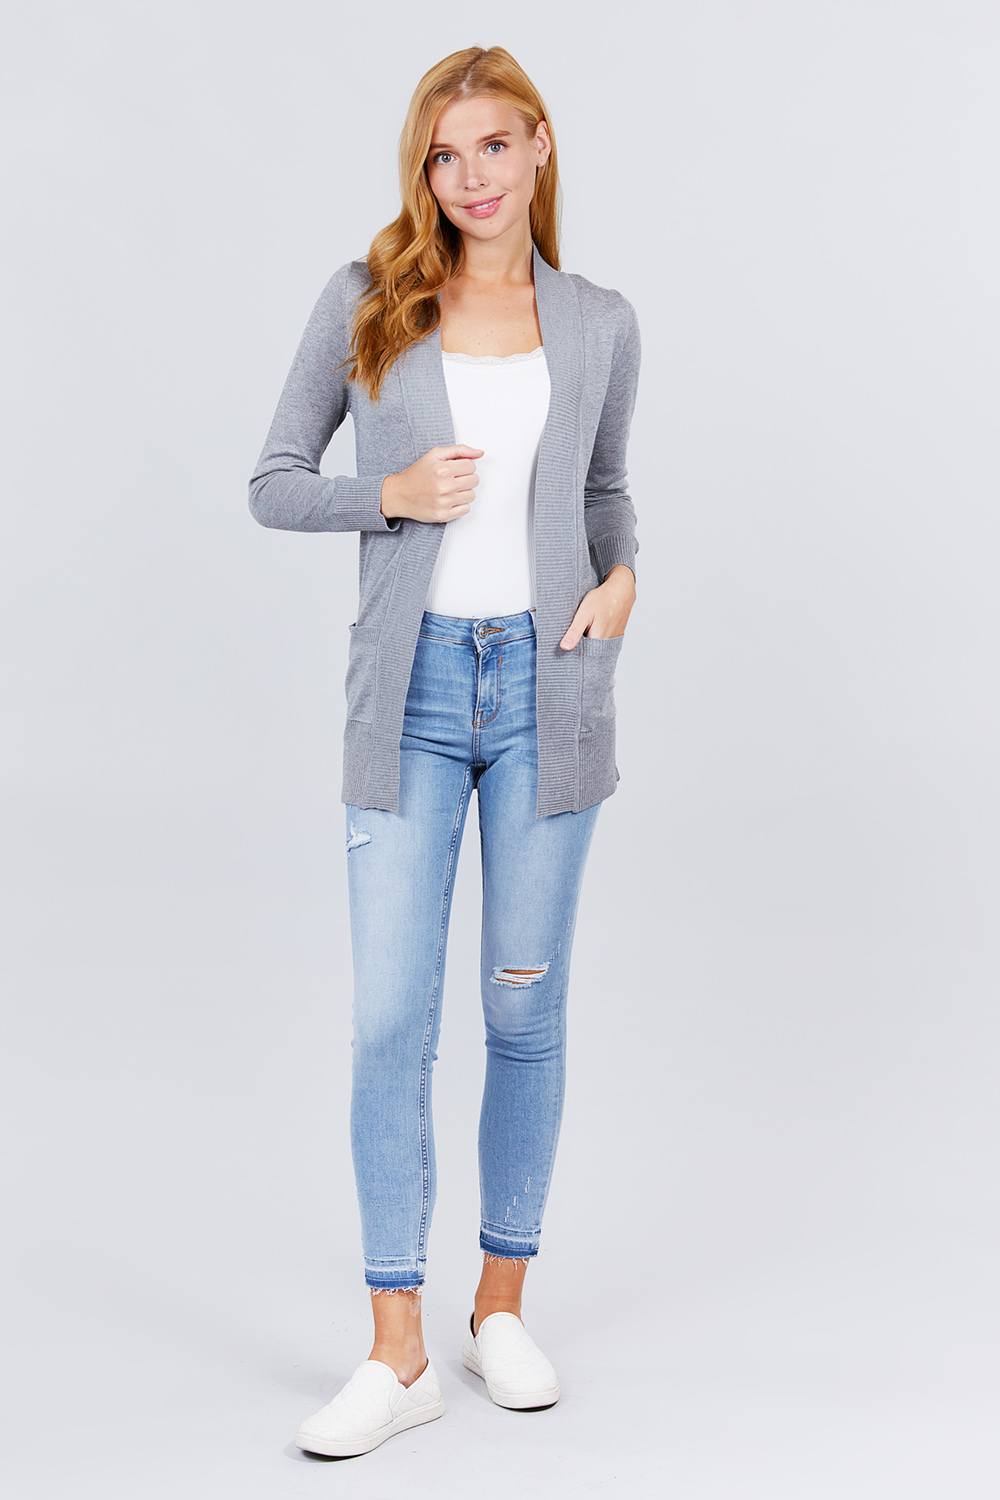 Long Sleeve Rib Banded Open Sweater Cardigan With Pockets-TOPS / DRESSES-[Adult]-[Female]-New Heather Grey-S-Blue Zone Planet